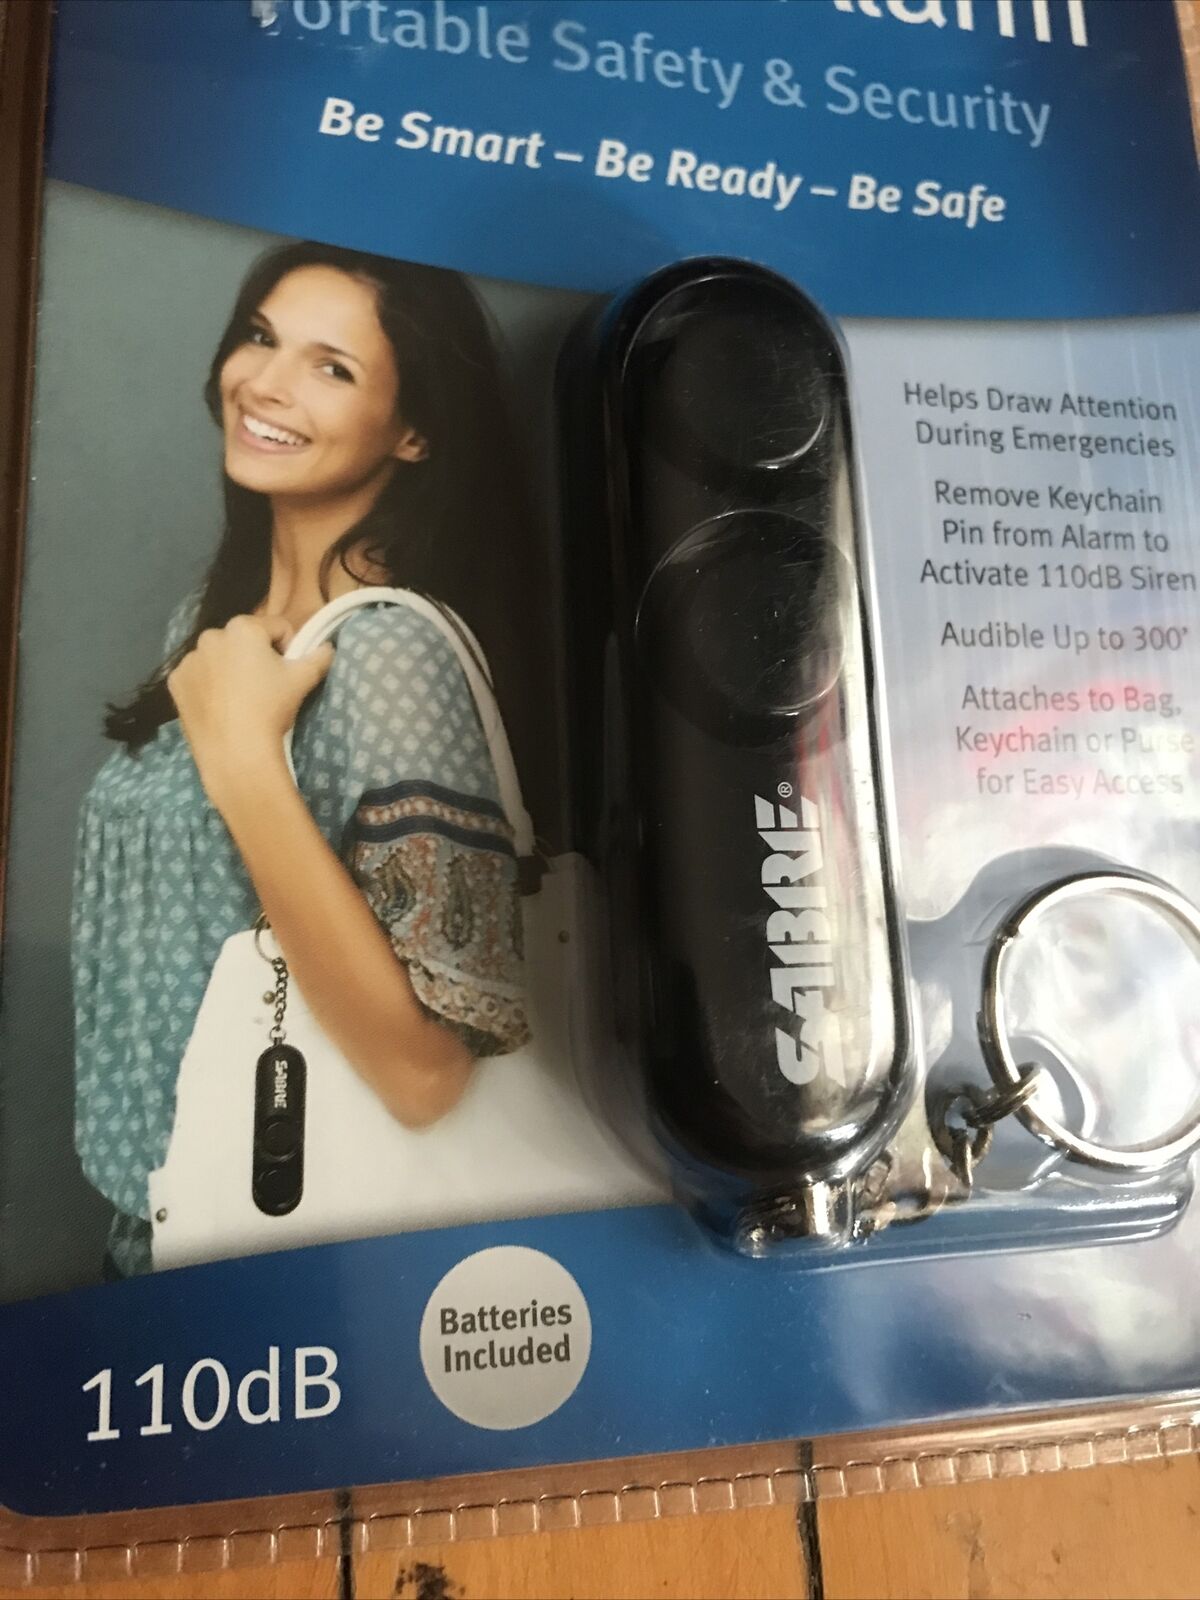 Sealed Sabre Personal Alarm with 110 dB